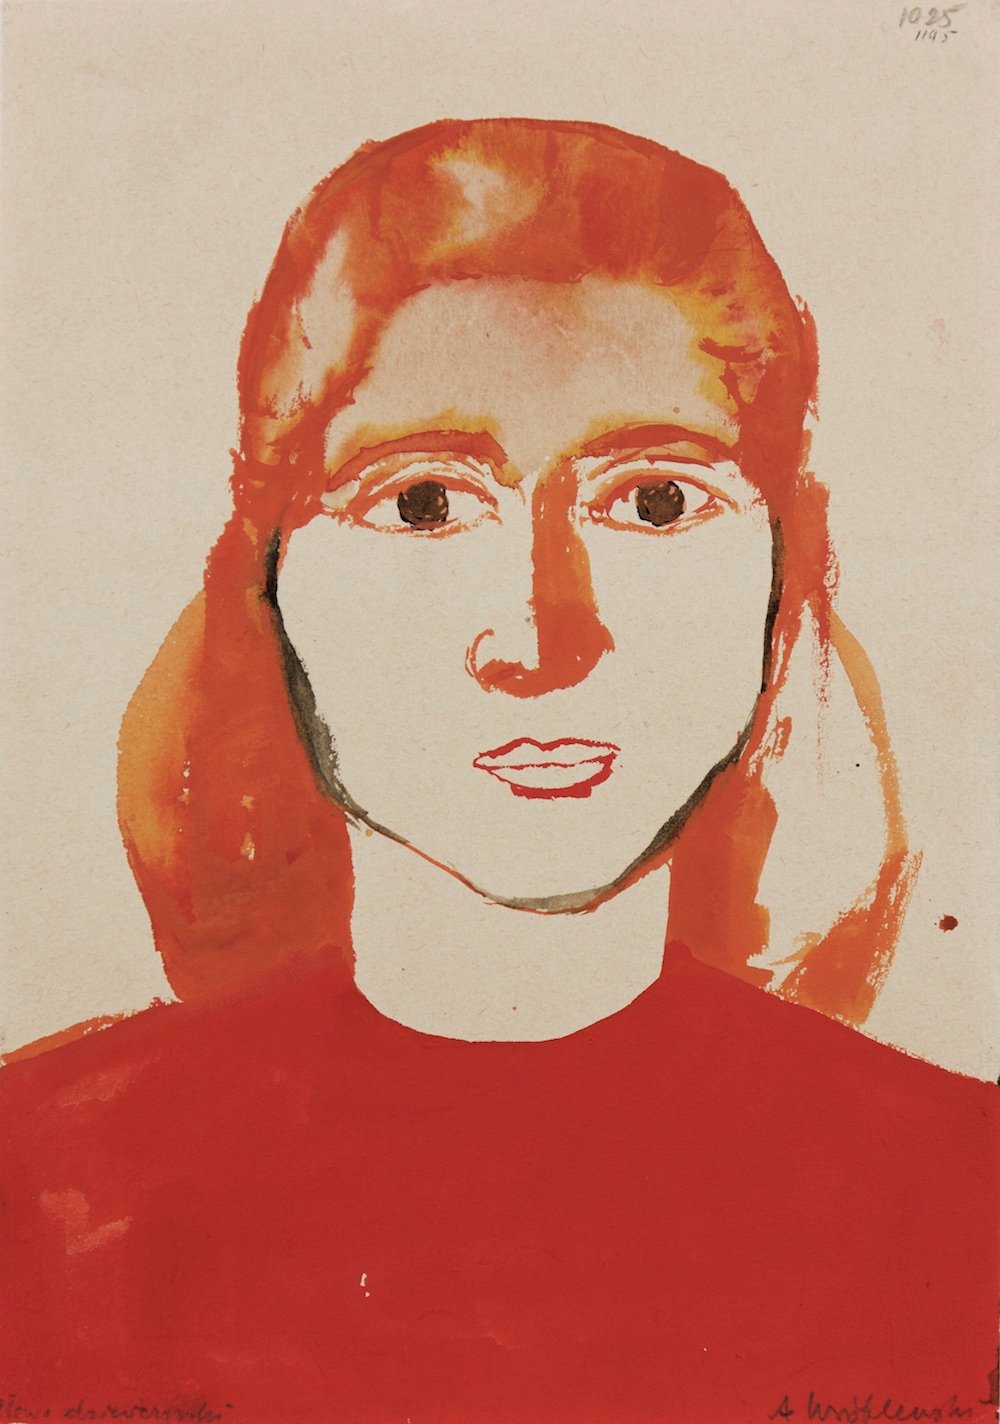 (Head of a Girl), [Head of a Girl no.1025], Undated Watercolour on paper, 29.7 x 21 cm. Private Collection  © Andrzej Wróblewski Foundation